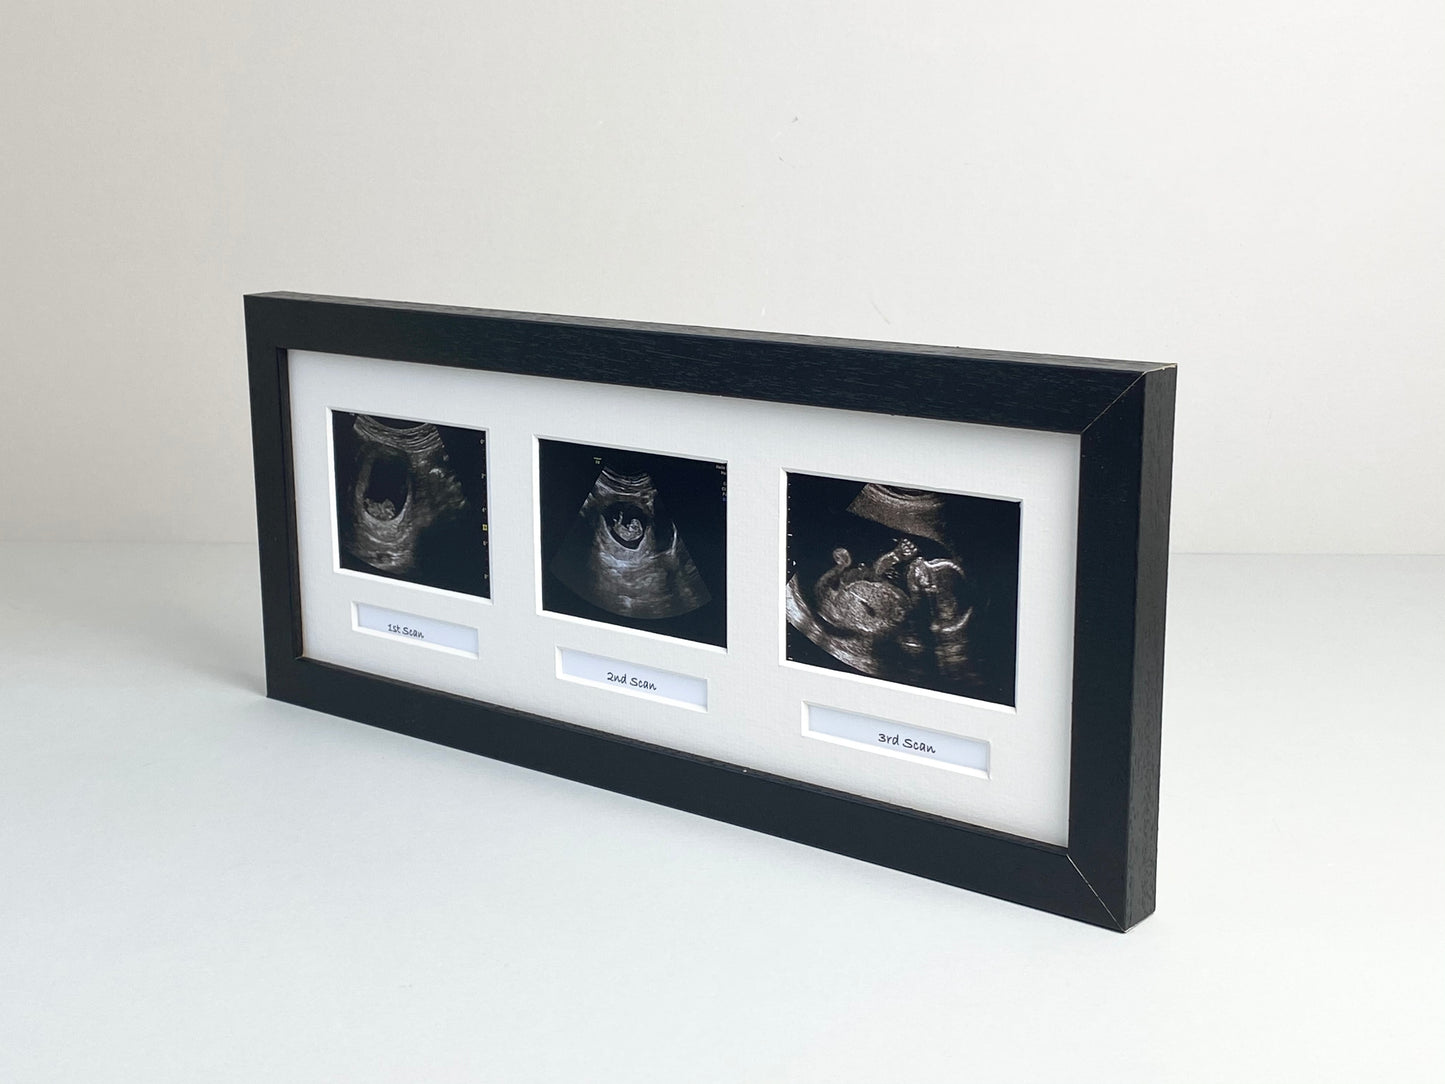 Landscape Baby Scan frame. Suits three Scans and three Text Boxes. Optional Personalisation - PhotoFramesandMore - Wooden Picture Frames